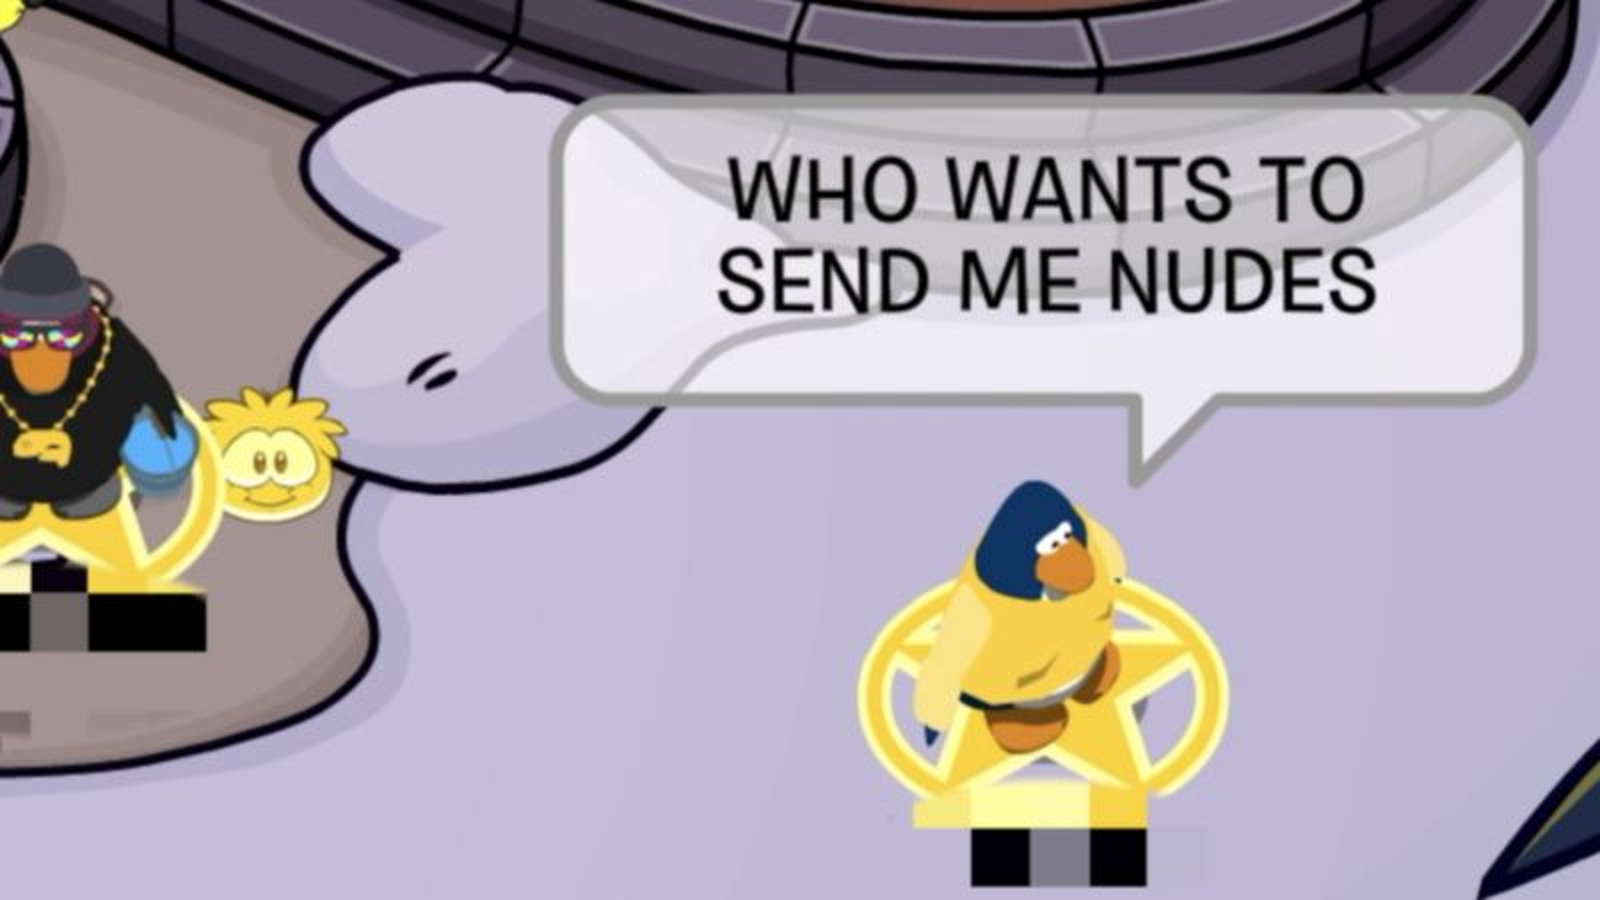 Club Penguin: the kids' website that became an internet obsession